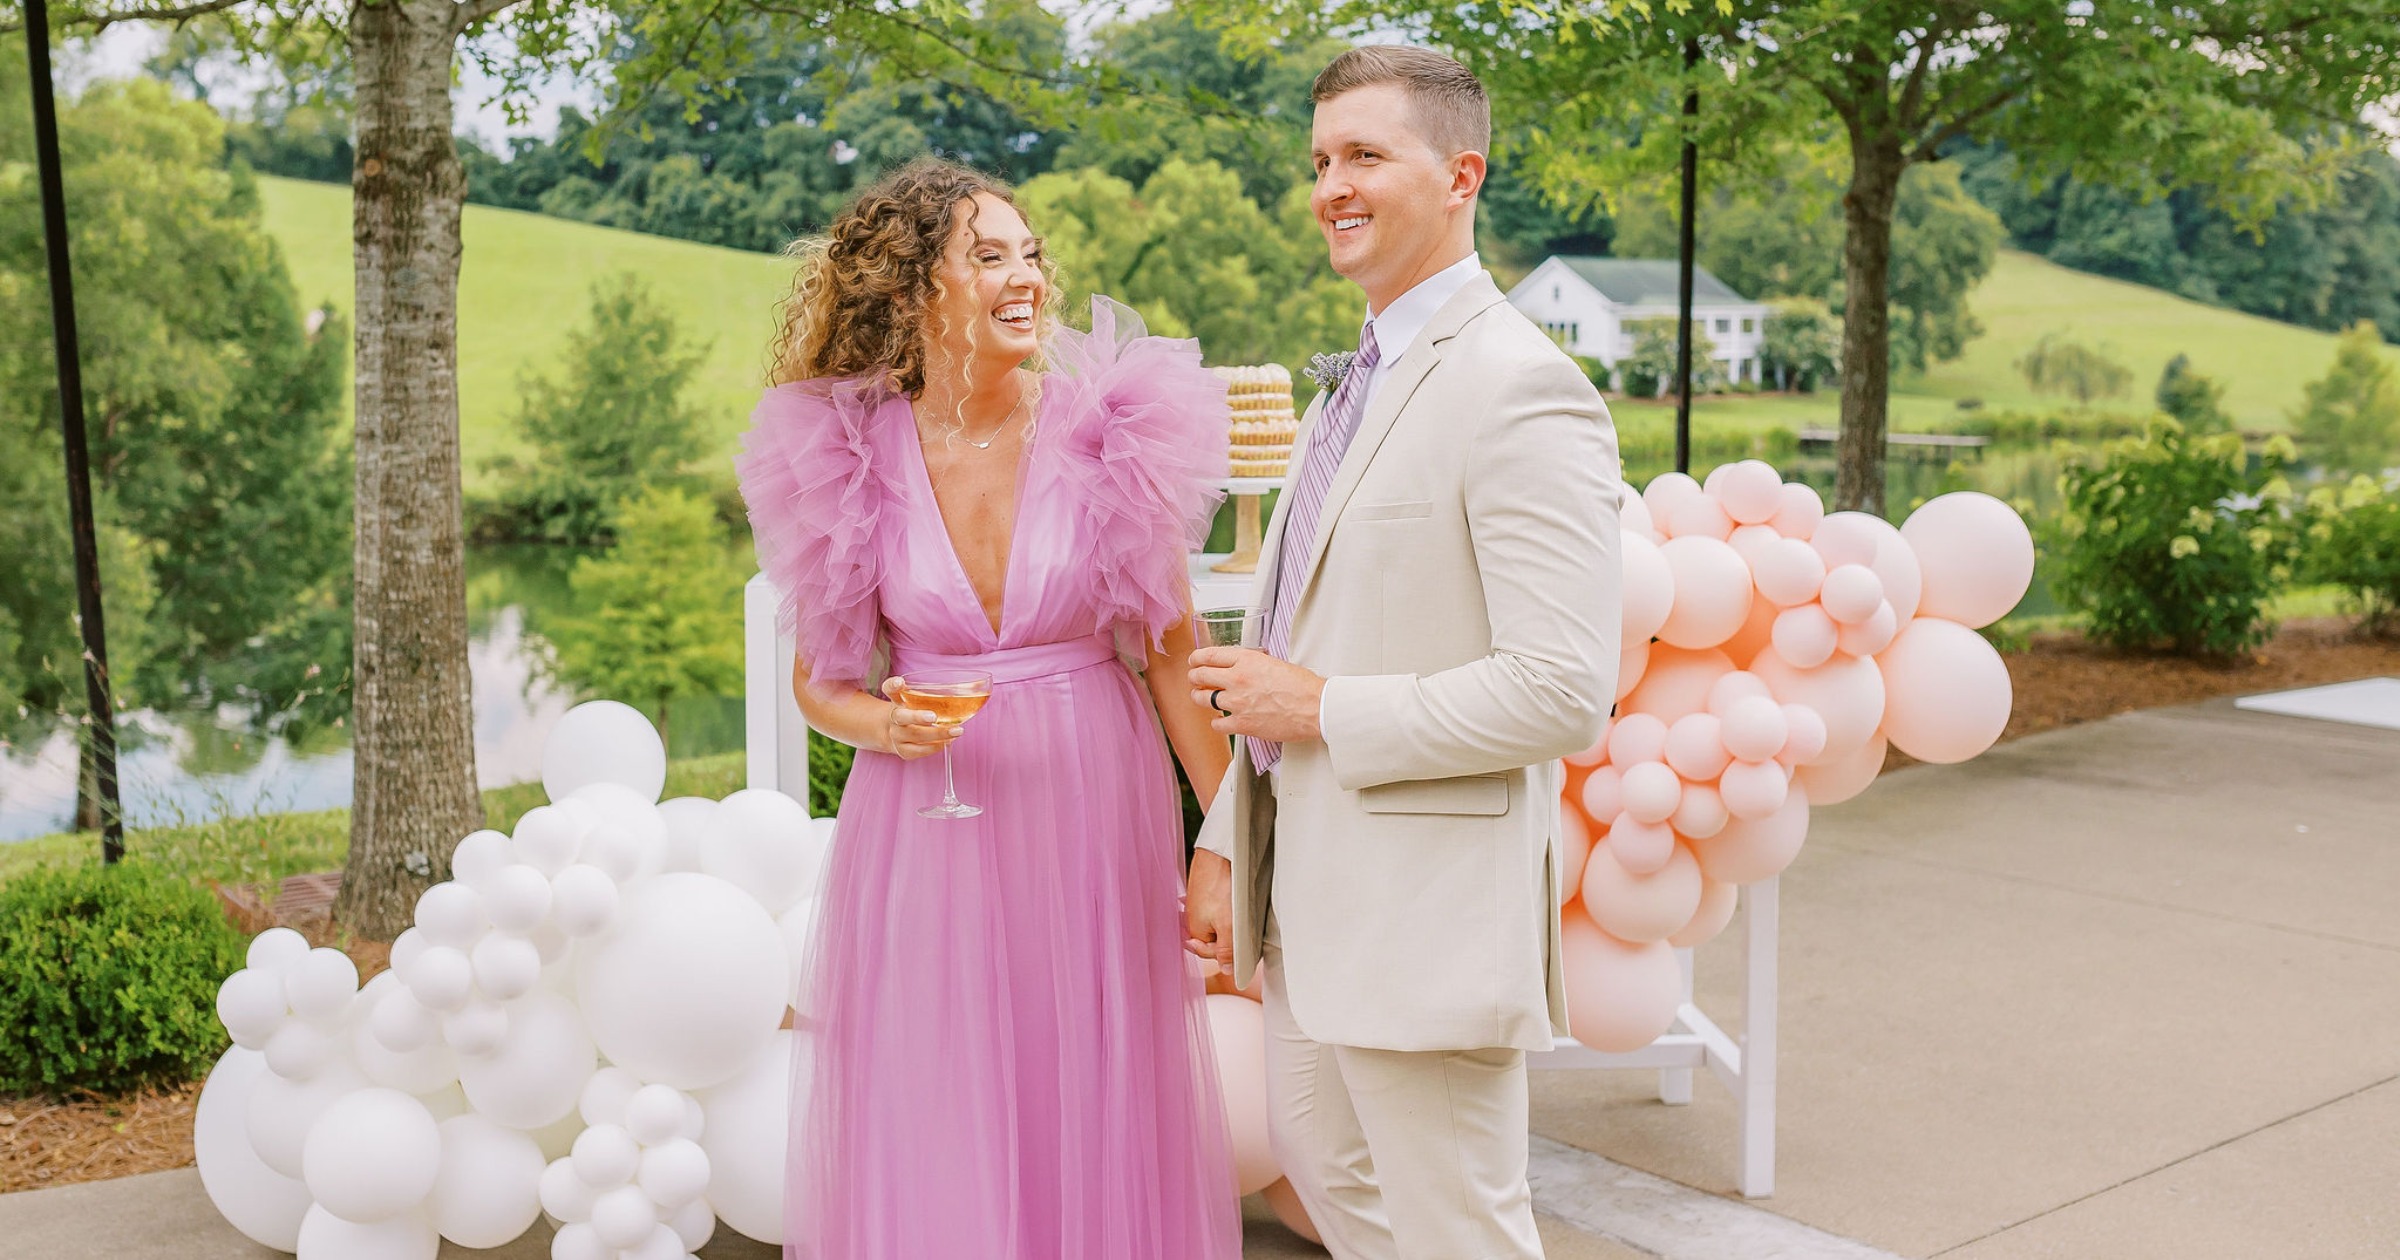 Epic Engagement Parties Are a Big Thing in 2023 And We Love Them